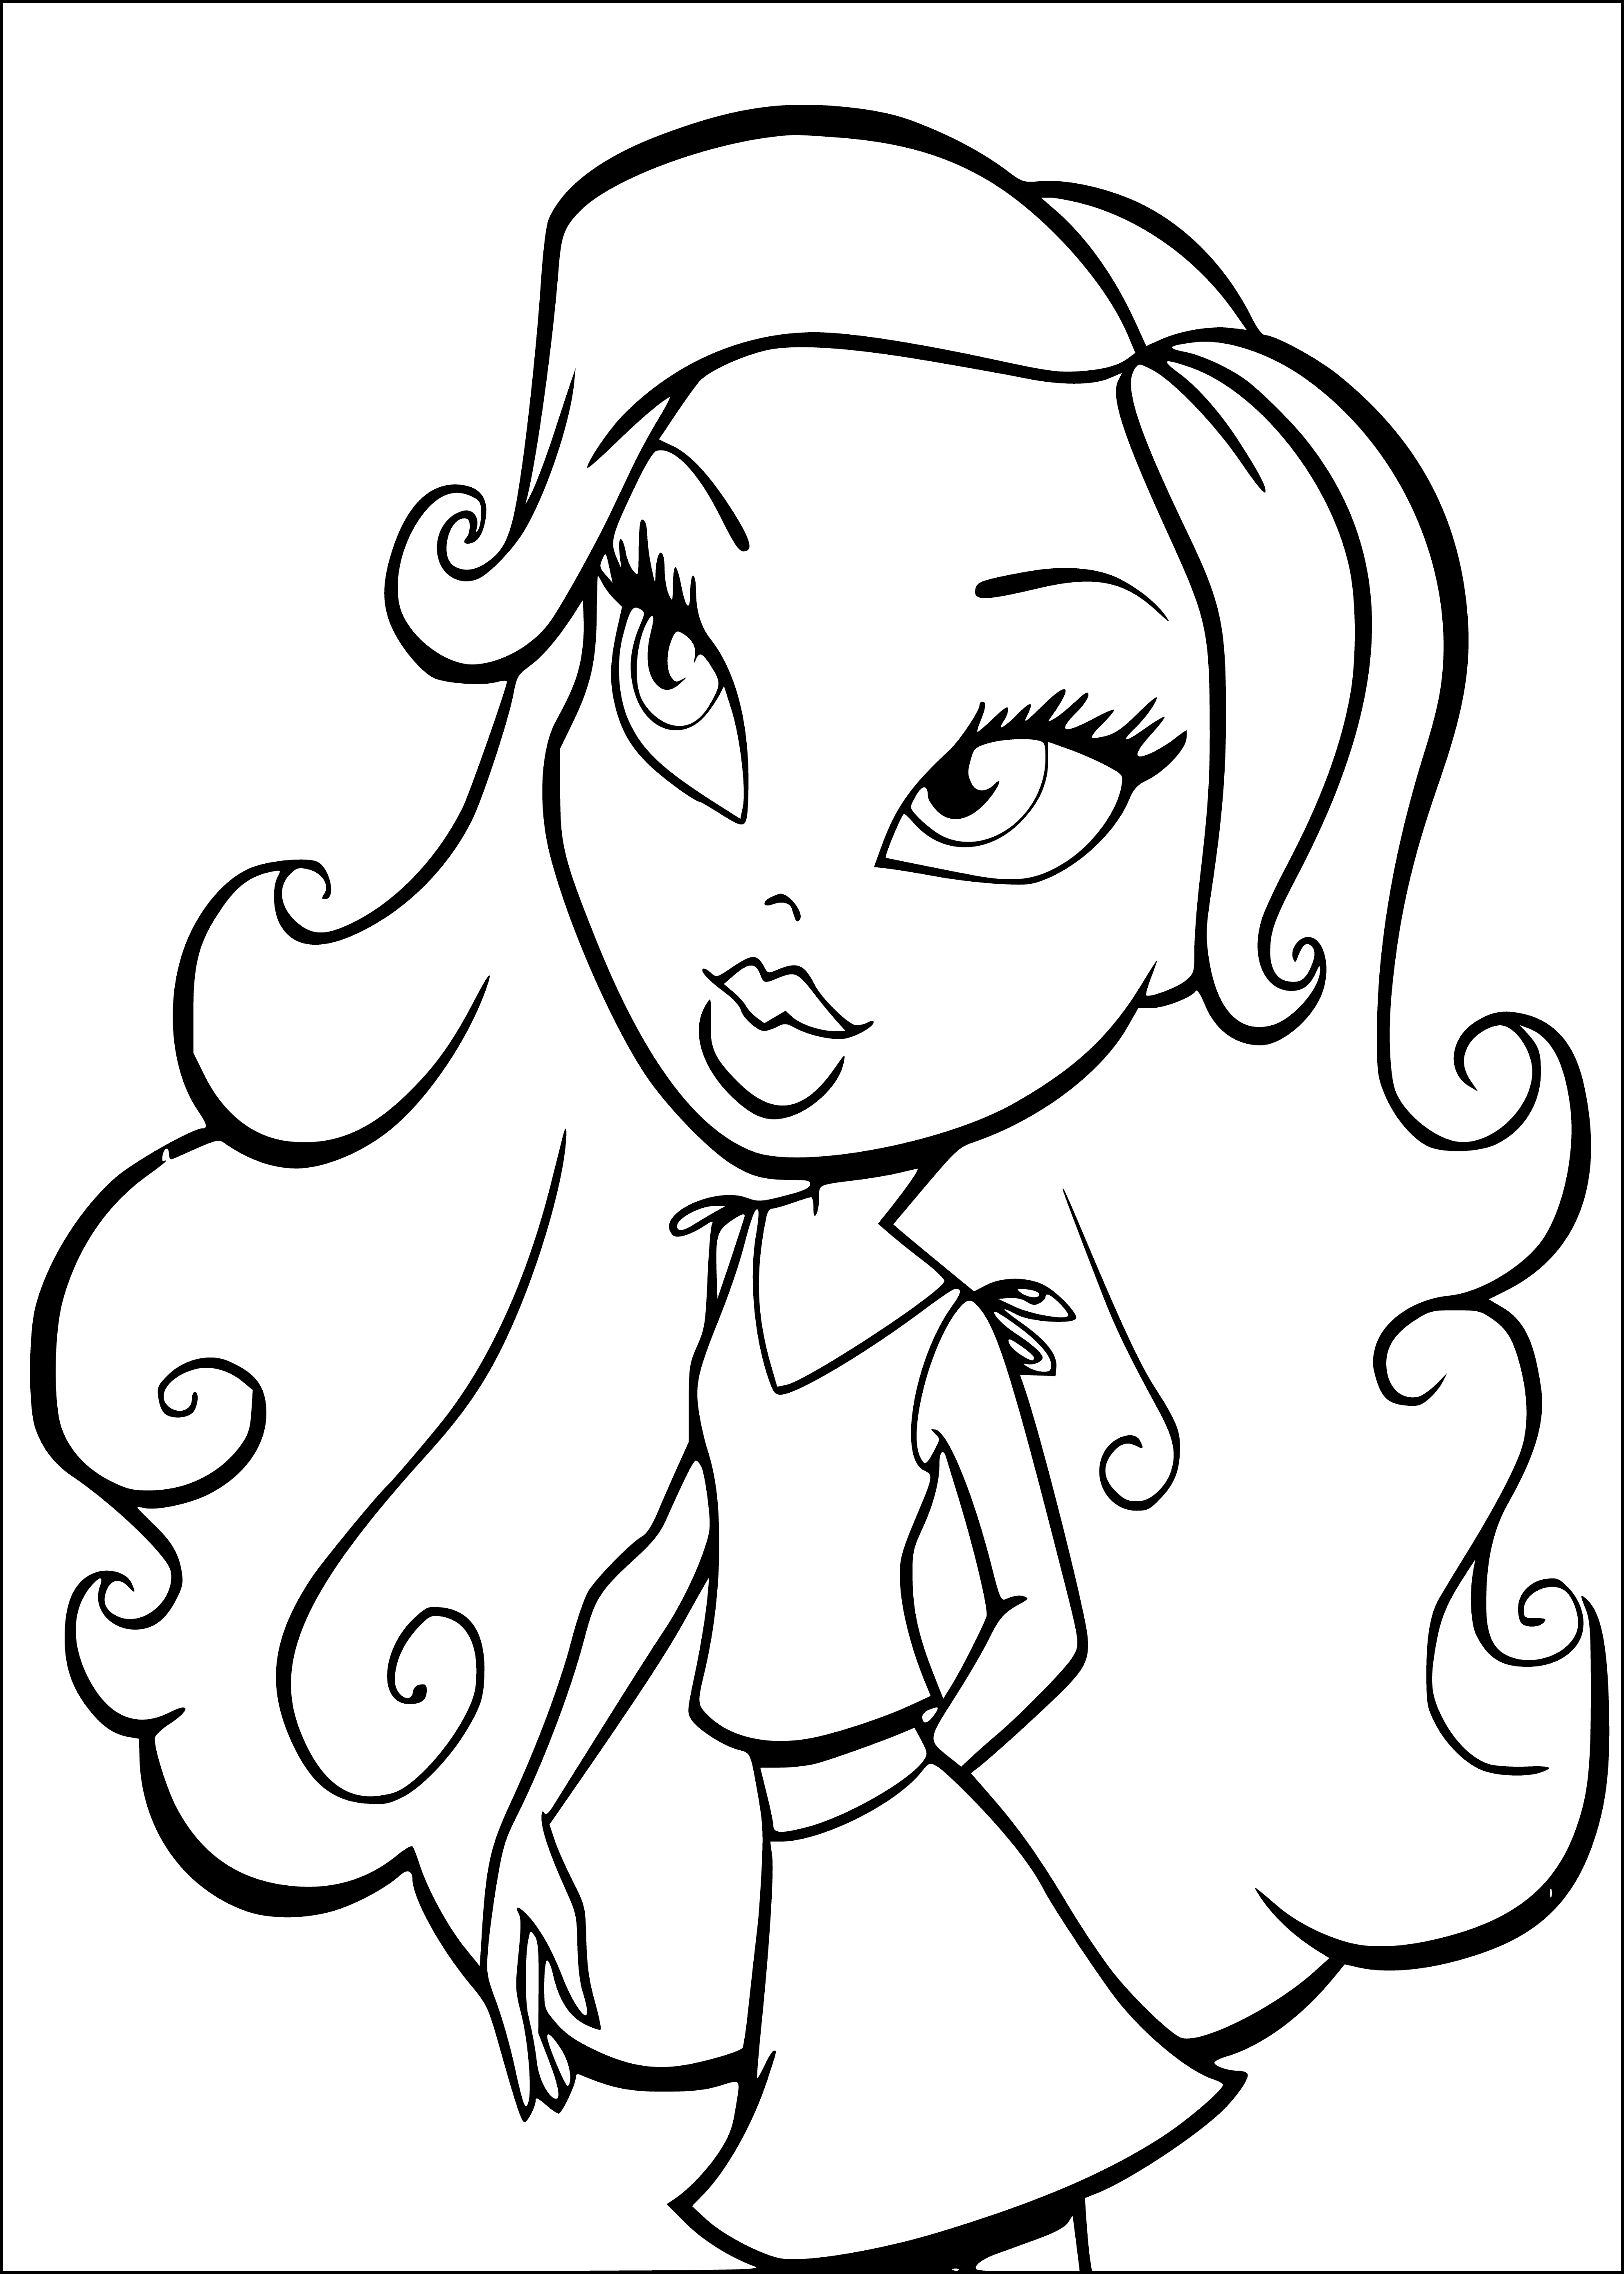 coloring page: The Bratz are four fashion- conscious BFFs: Cloe, Yasmin, Sasha and Jade, who love to express their individual styles and stay ahead of the fashion game! #stylegame